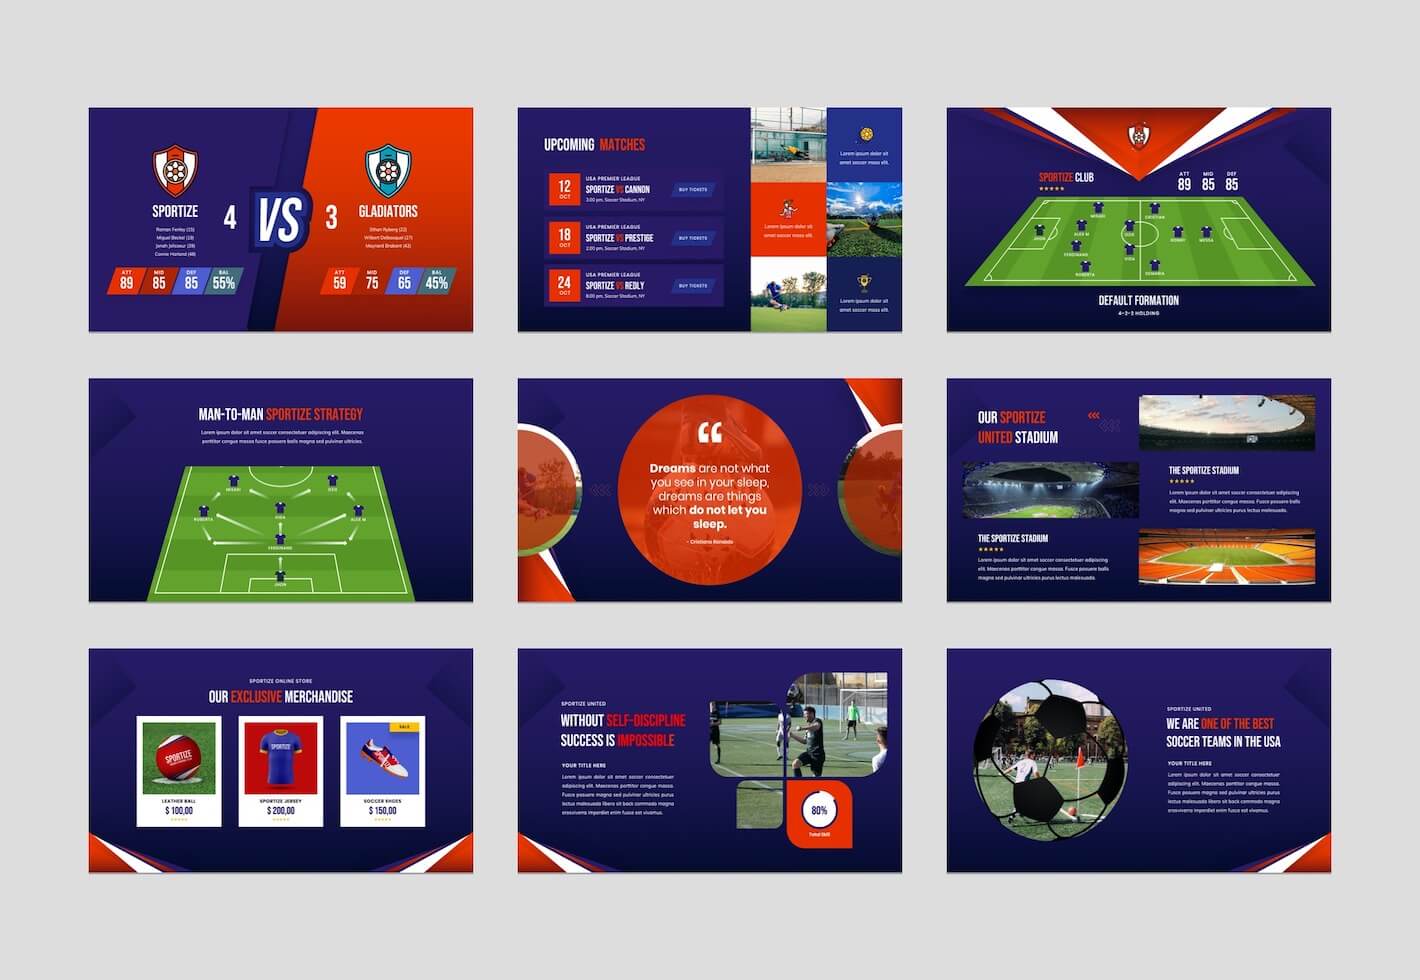 soccer powerpoint template